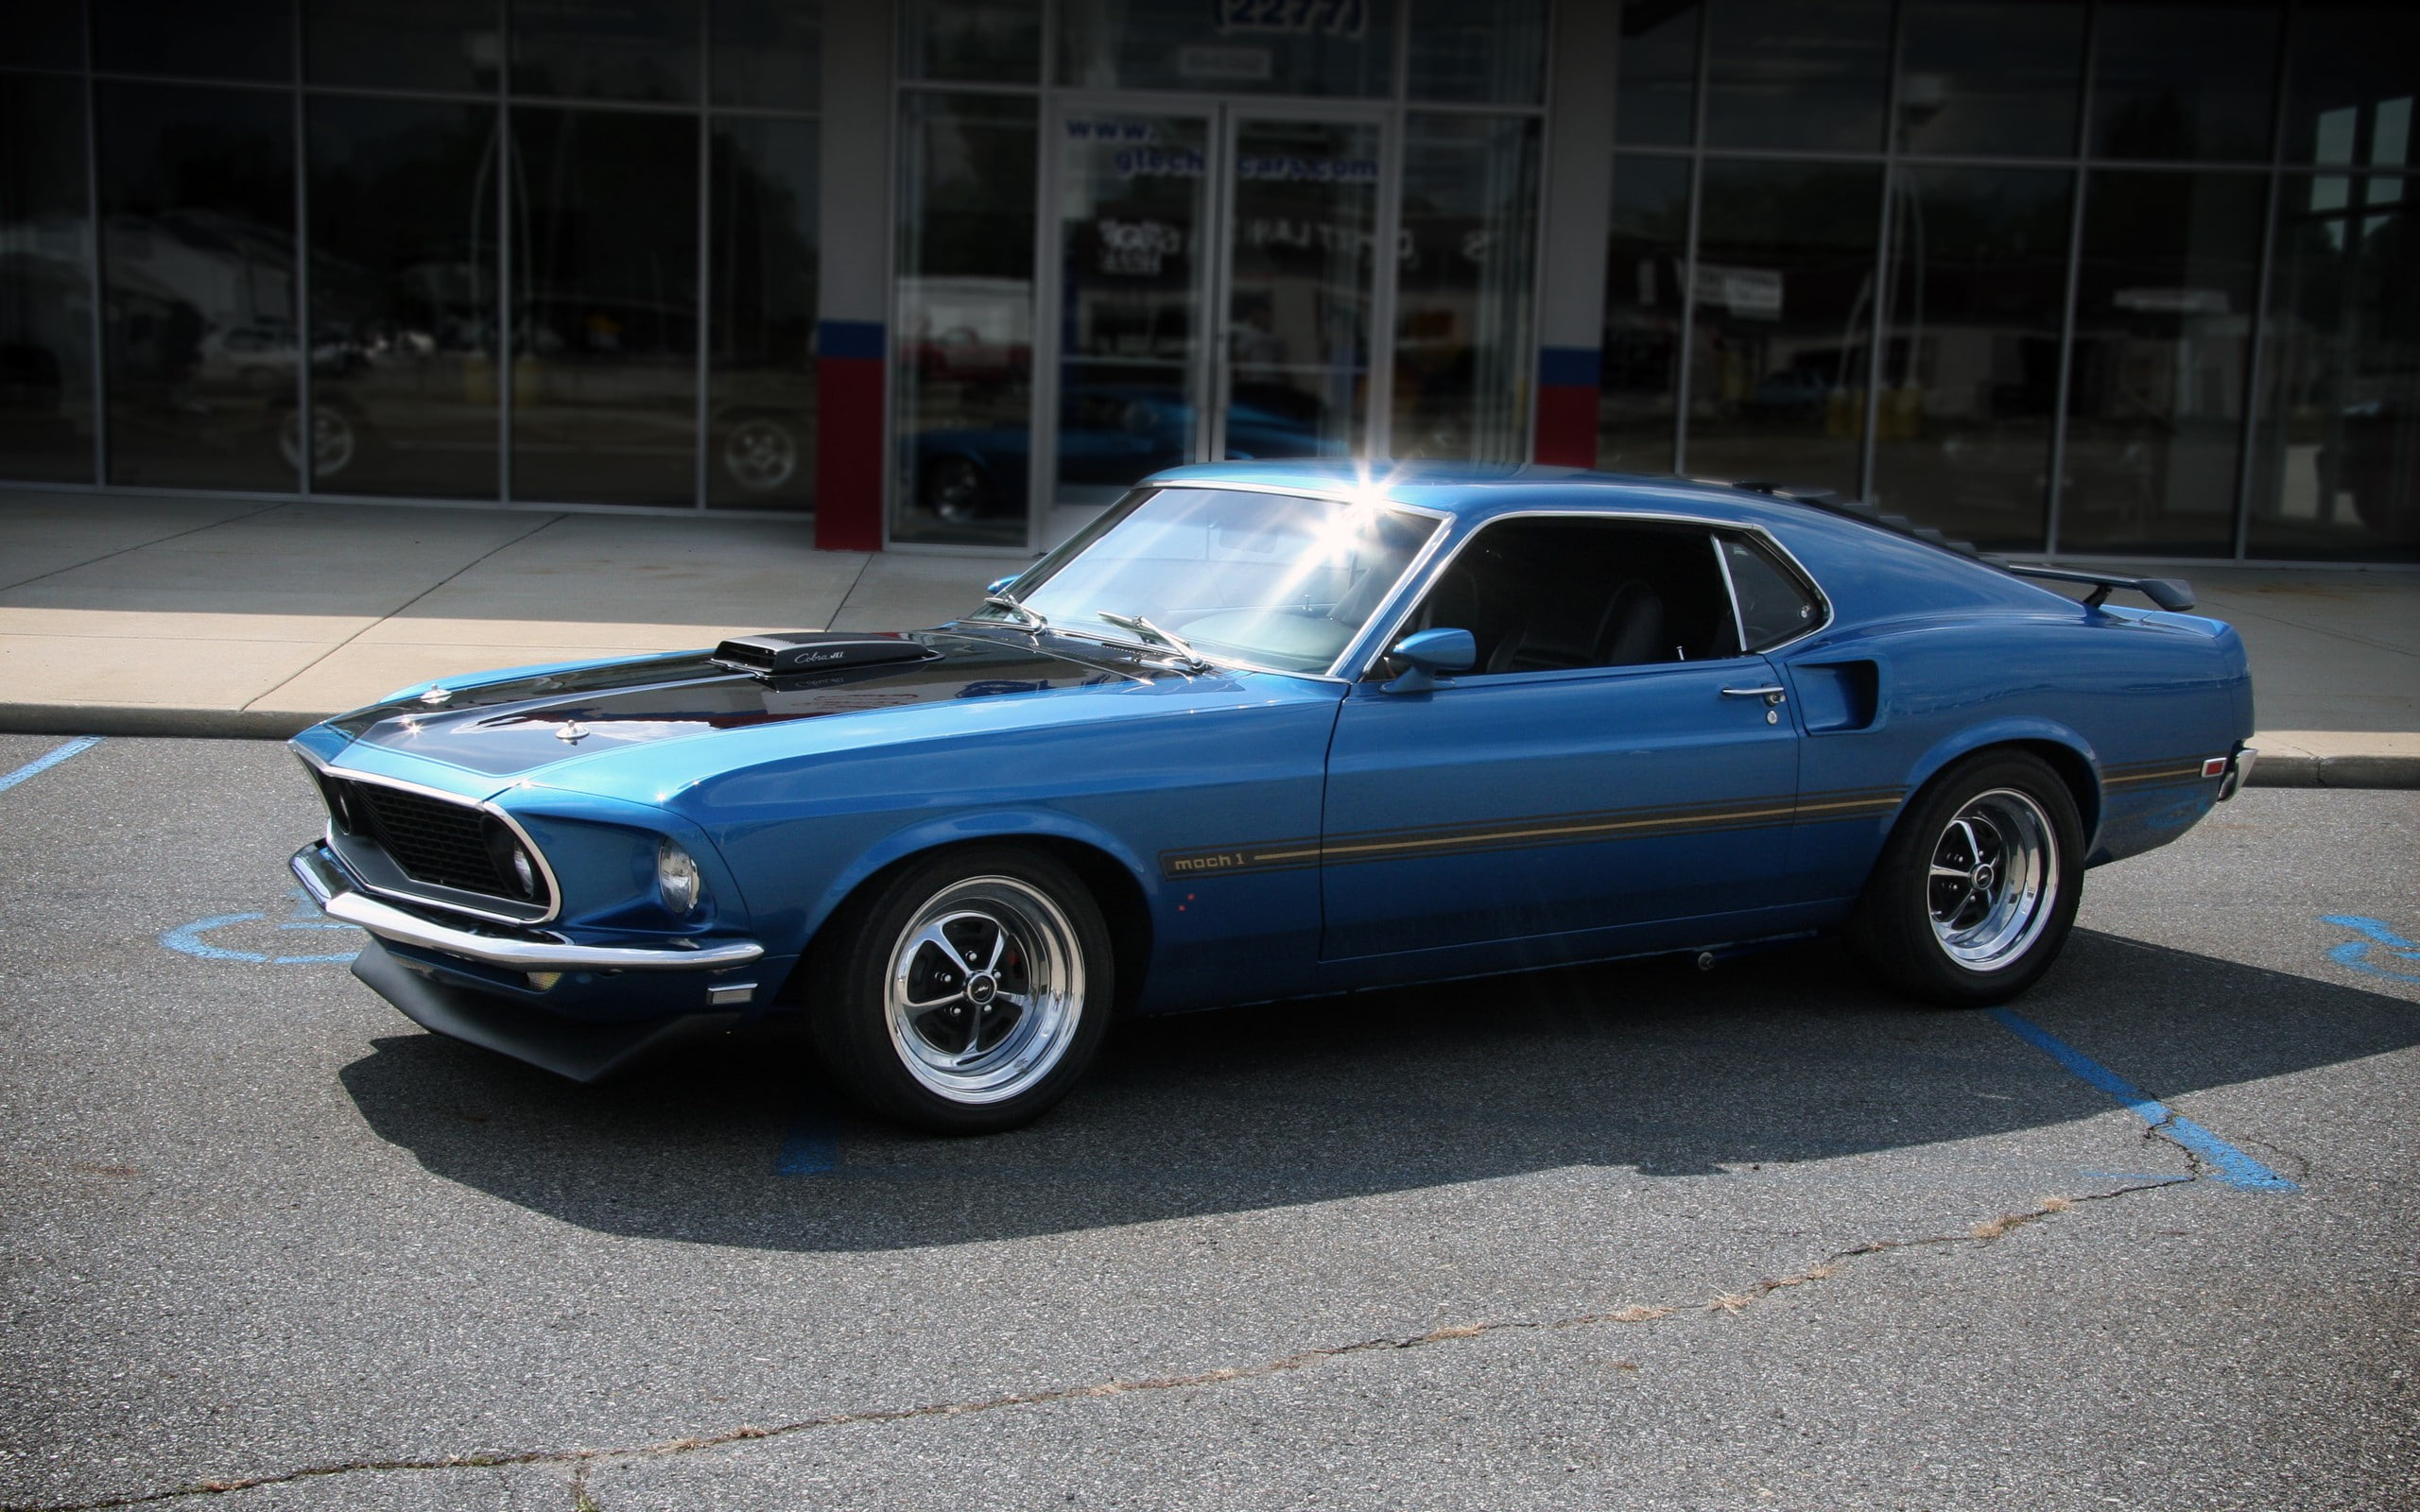 Ford Mustang, car, Ford Mustang Mach 1